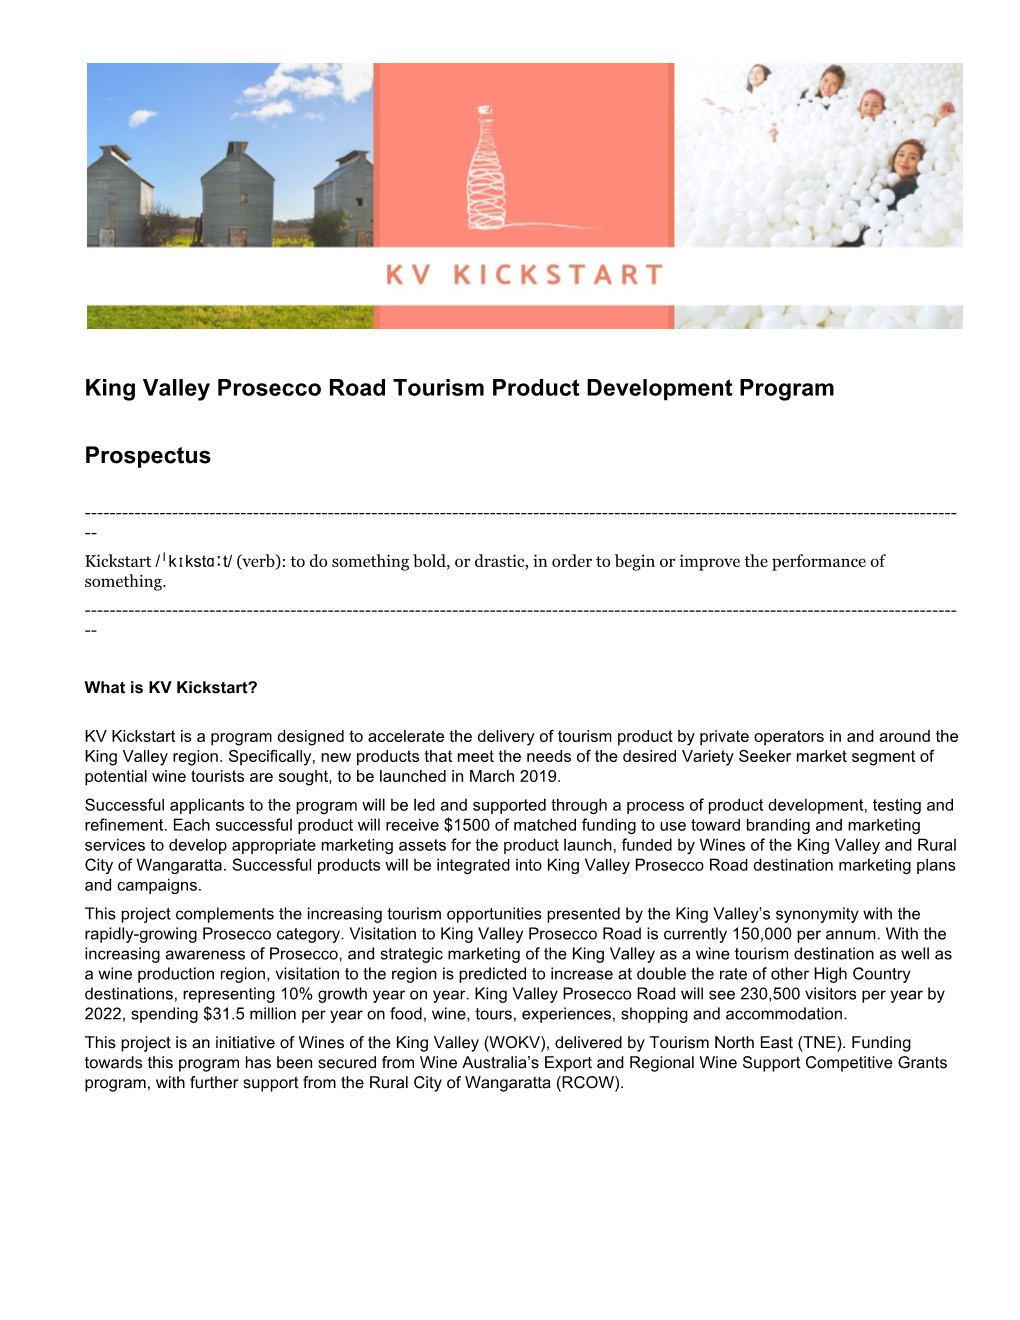 King Valley Prosecco Road Tourism Product Development Program